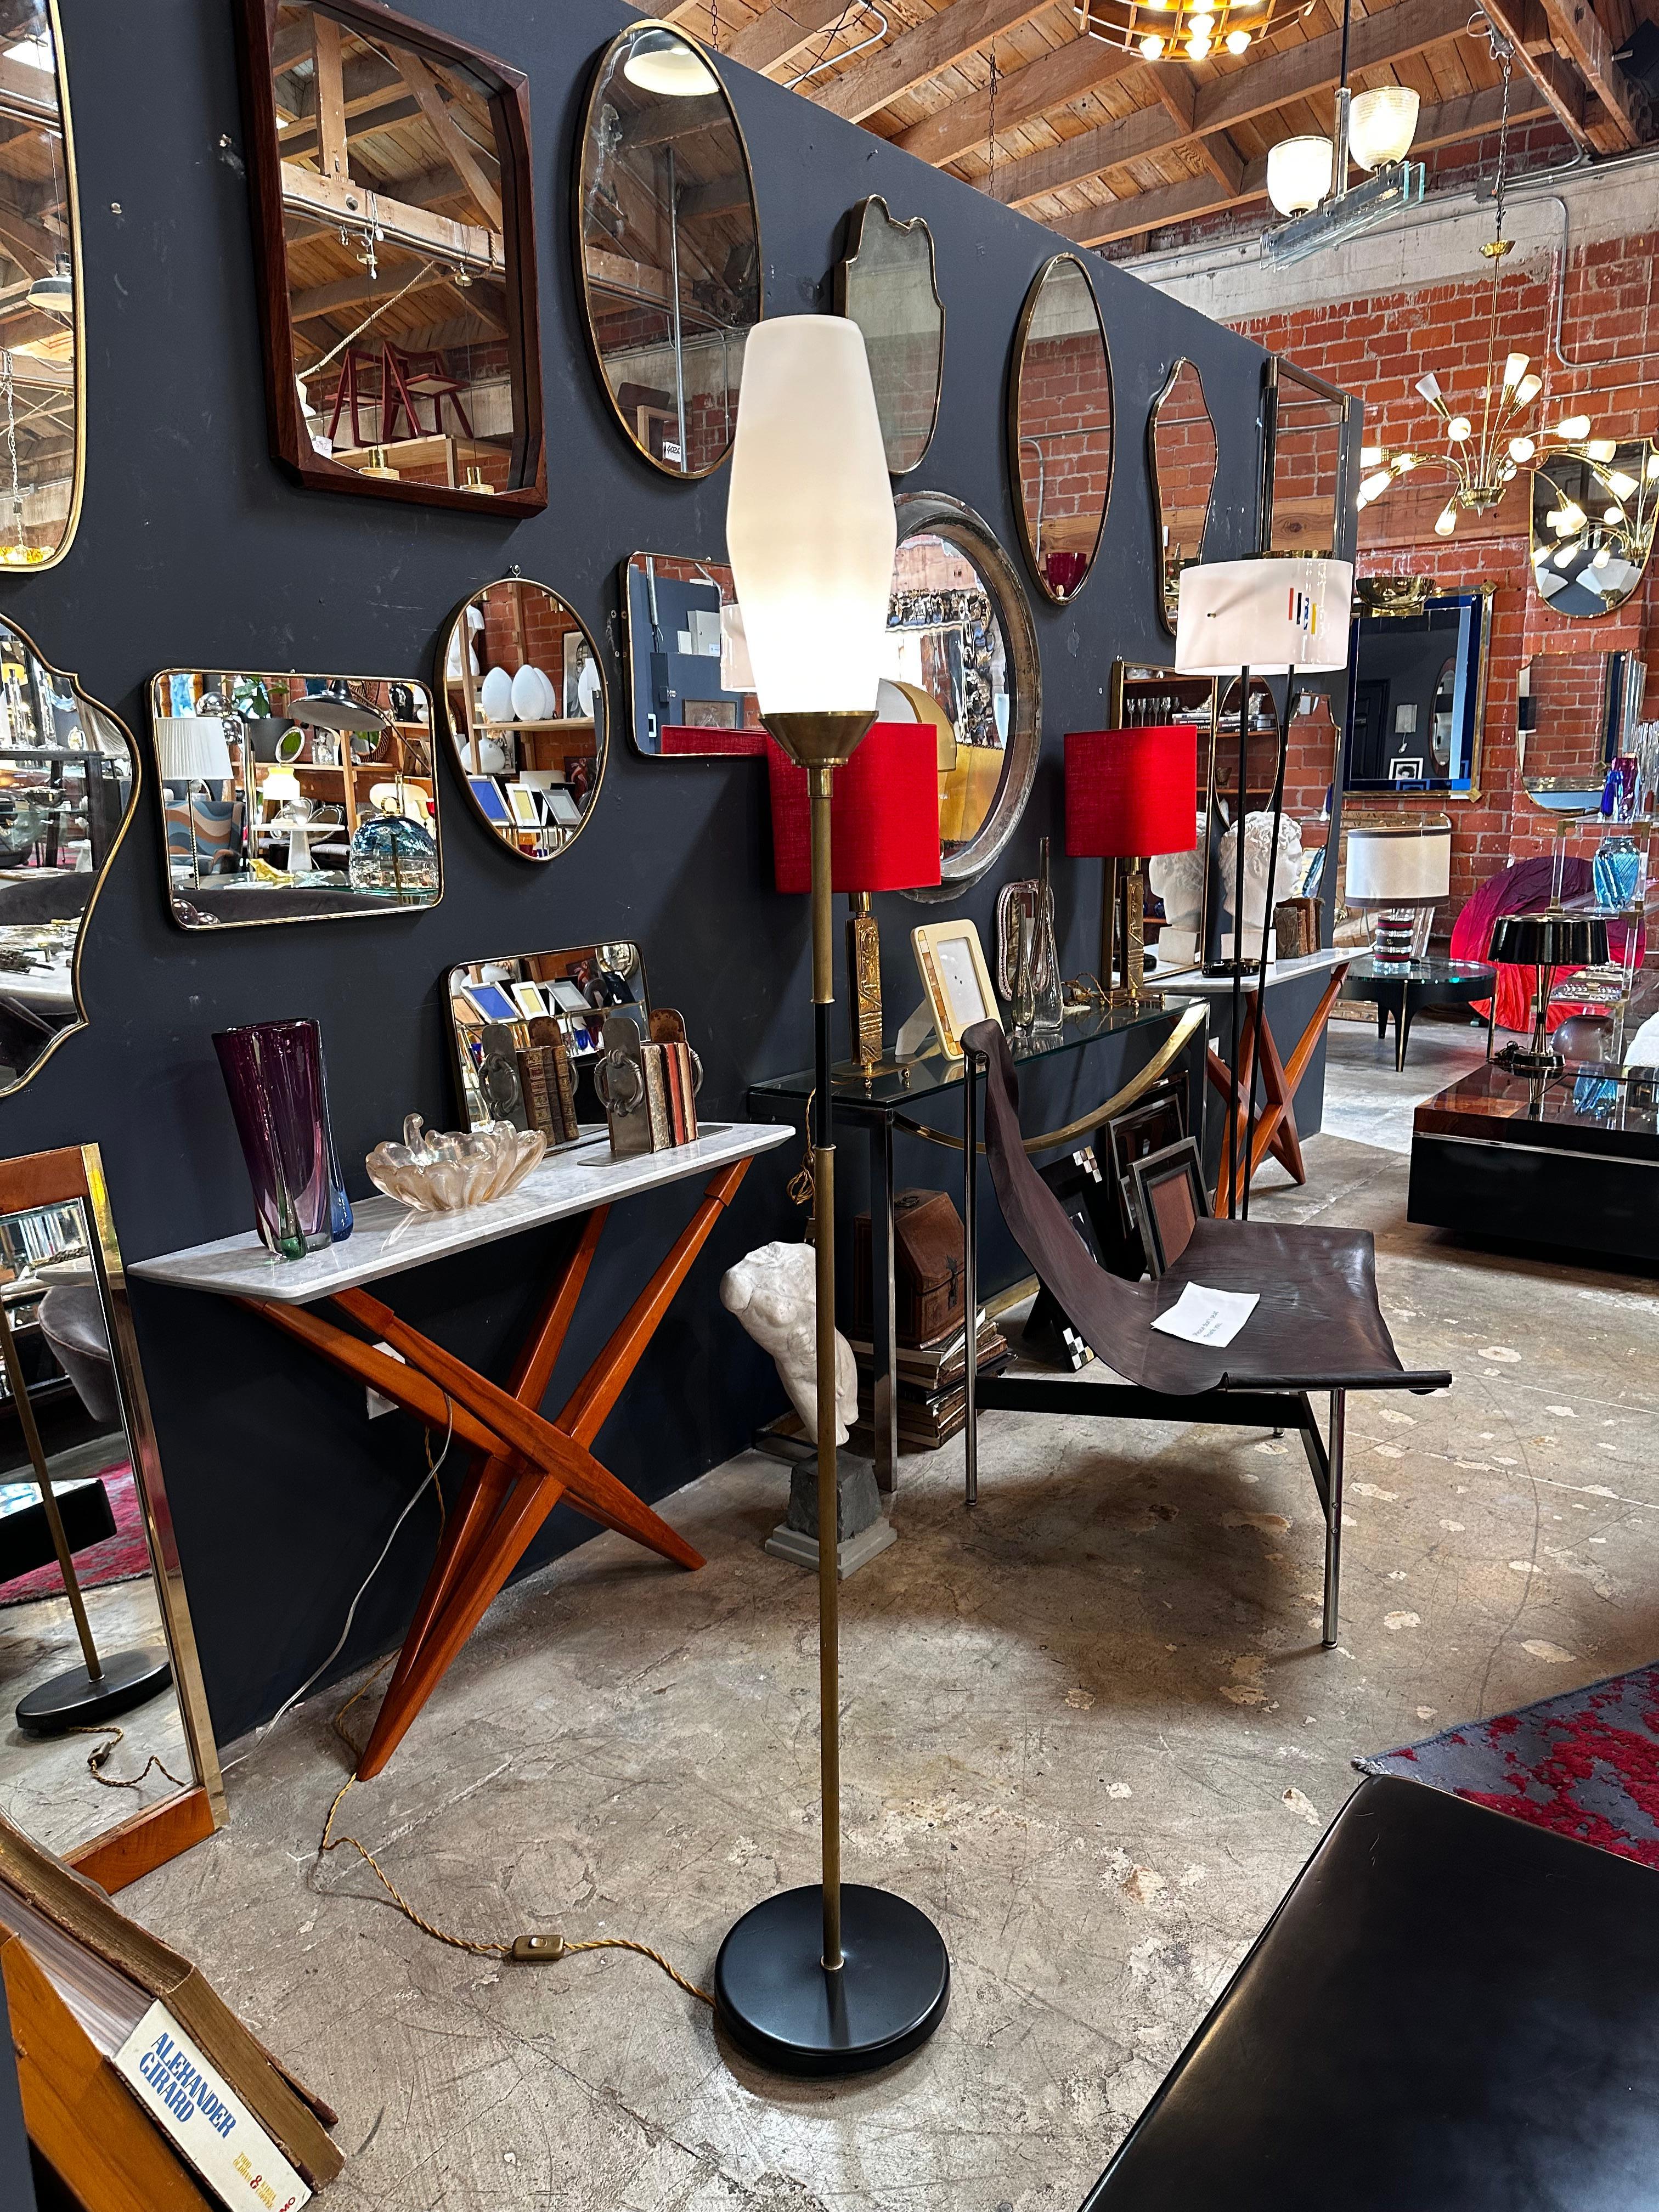 The Mid Century Italian Floor Lamp by Stilnovo from the 1960s is a timeless piece of design. Characterized by sleek lines and innovative styling, this lamp embodies the iconic mid-century modern aesthetic associated with Stilnovo. A perfect blend of